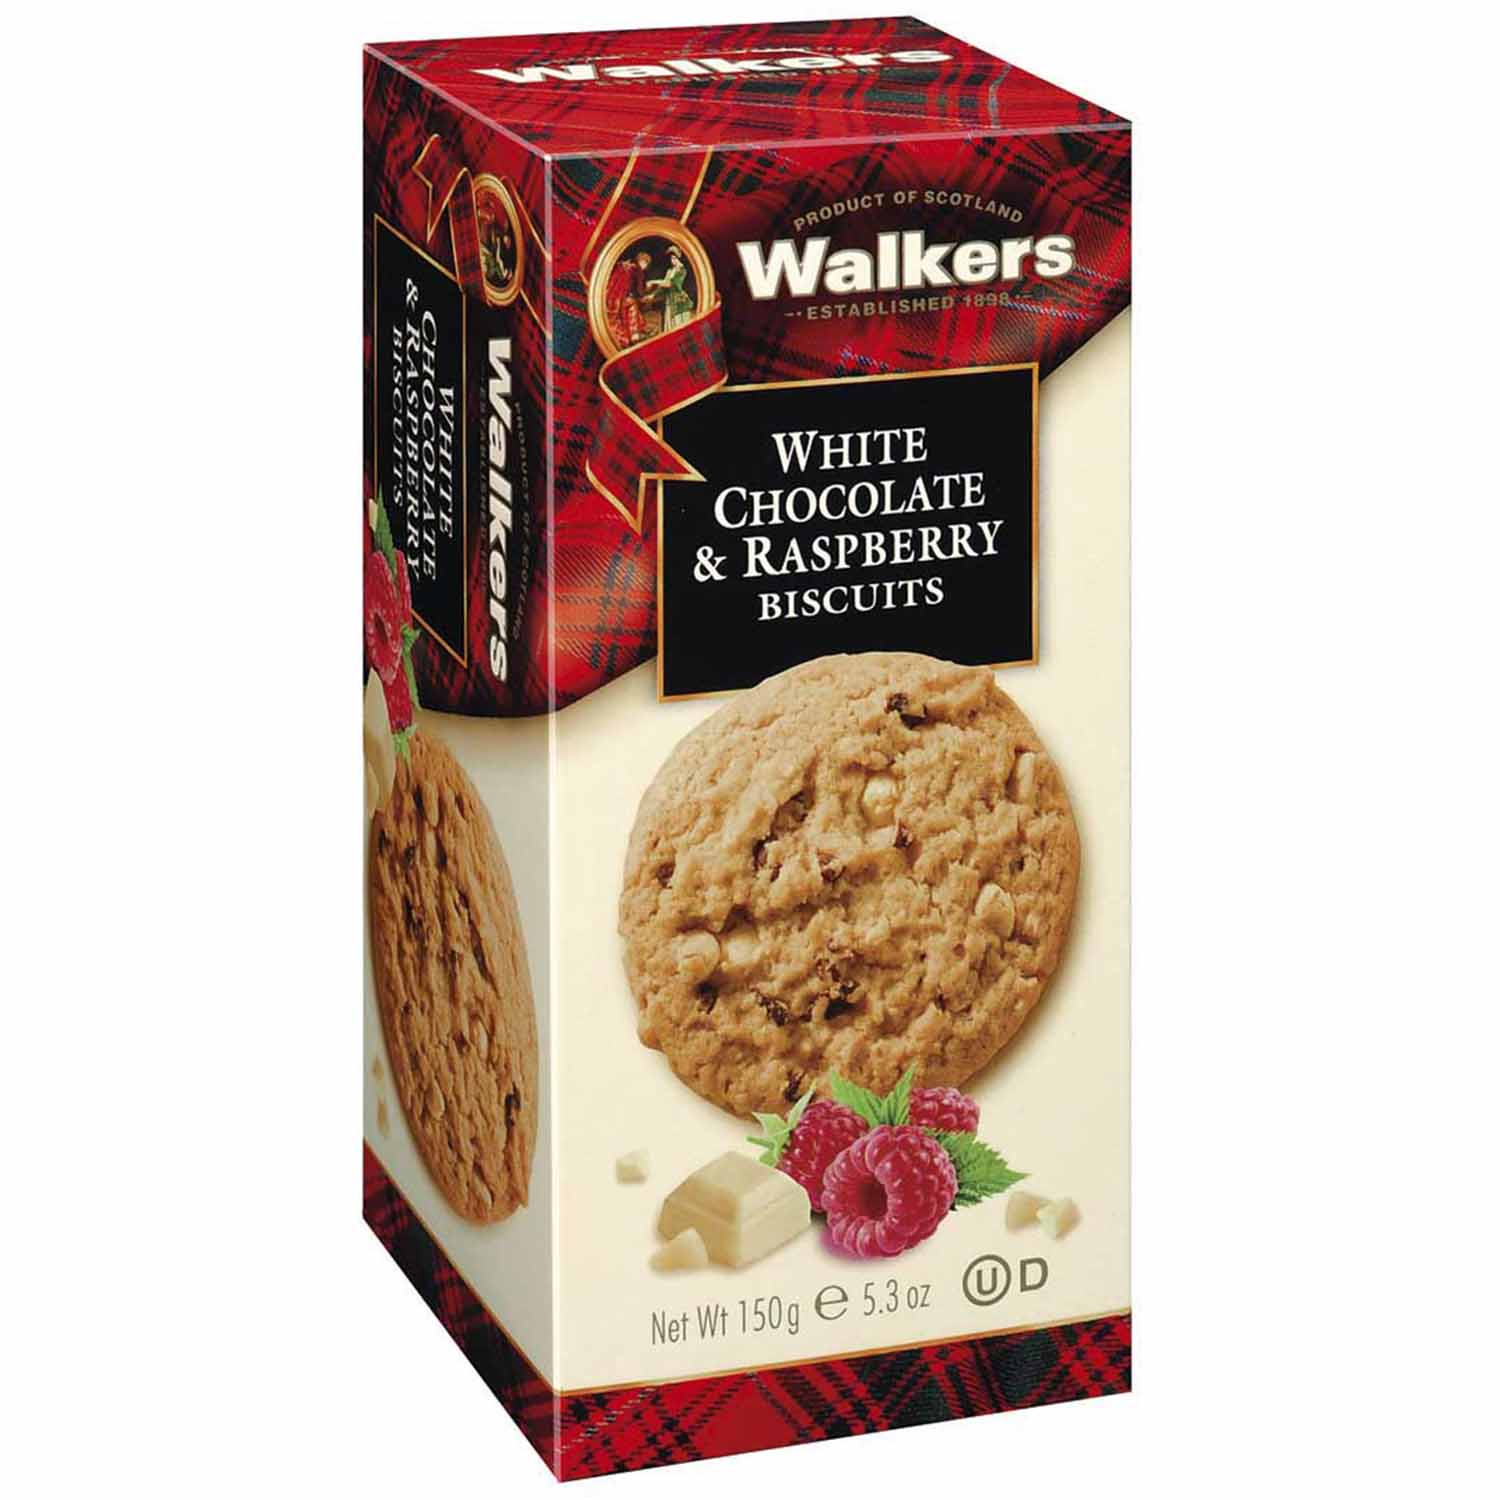 Walkers White Chocolate & Raspberry Biscuits